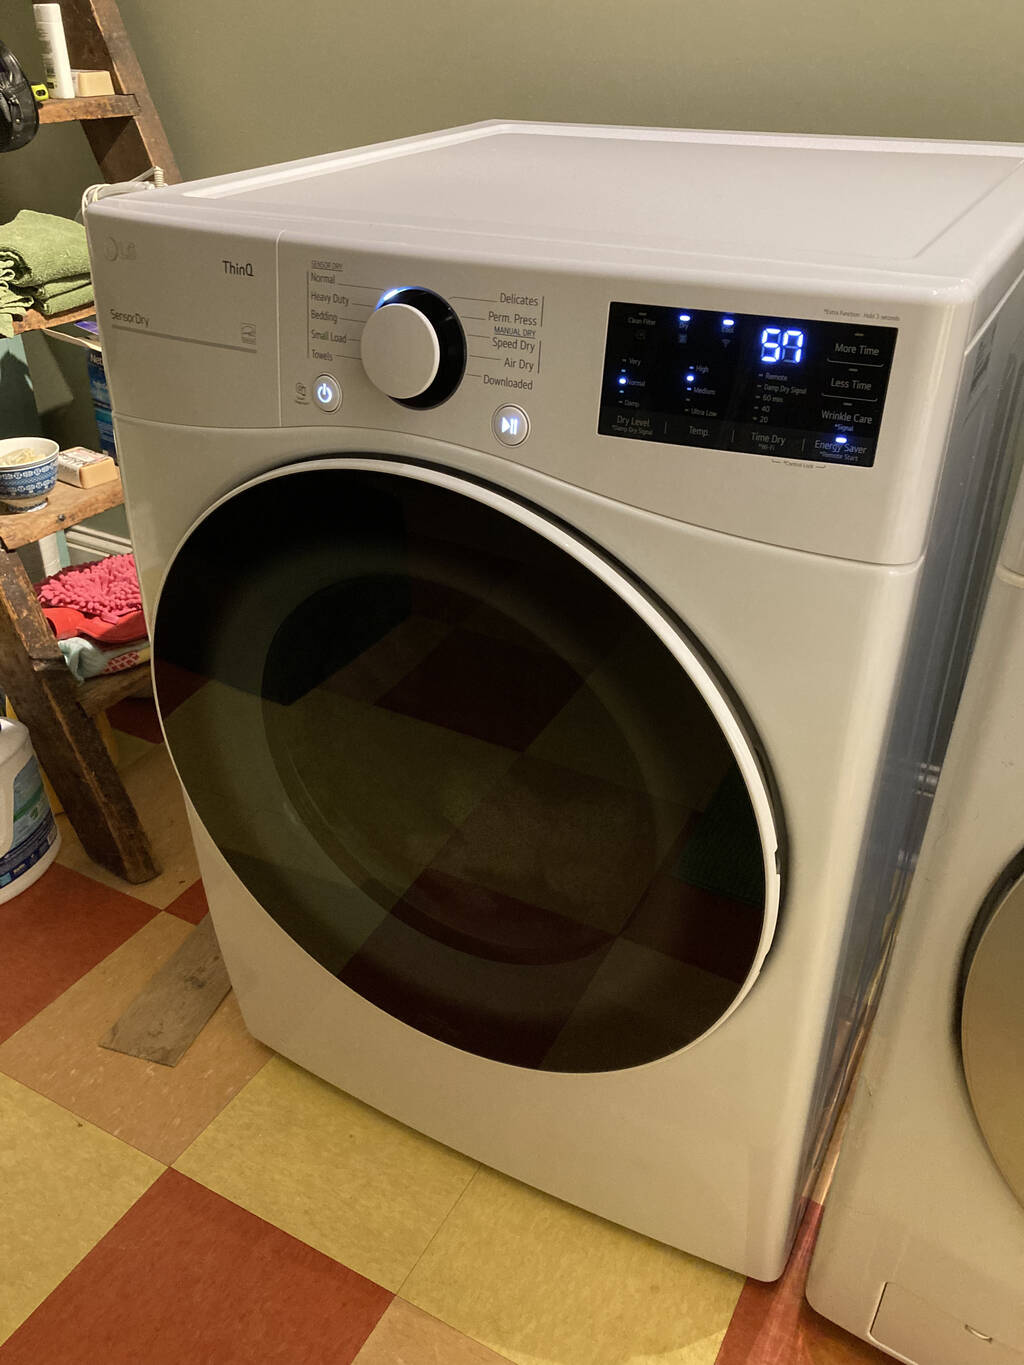 Our new clothes dryer, in place in the laundry room.